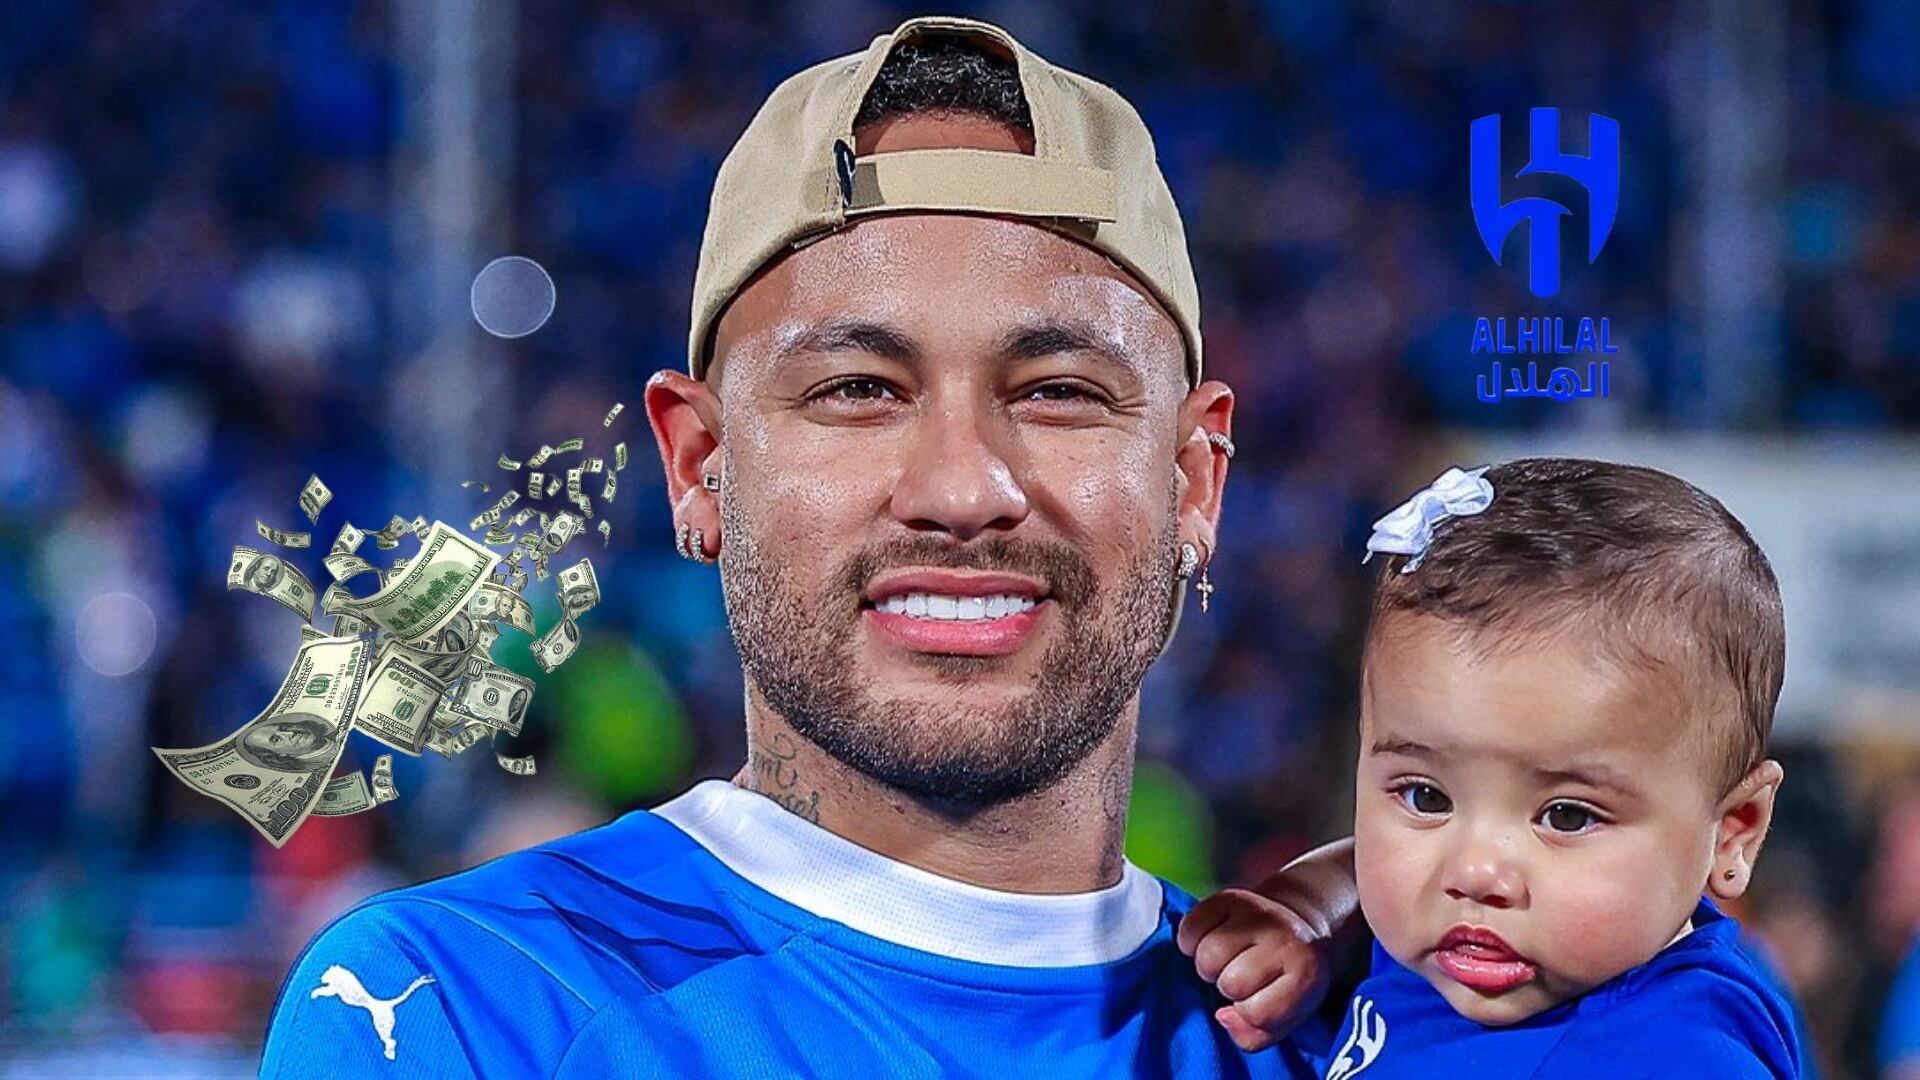 Fans keep talking about Neymar but outside of soccer, his cutest dad side and the millions he spends on his daughter